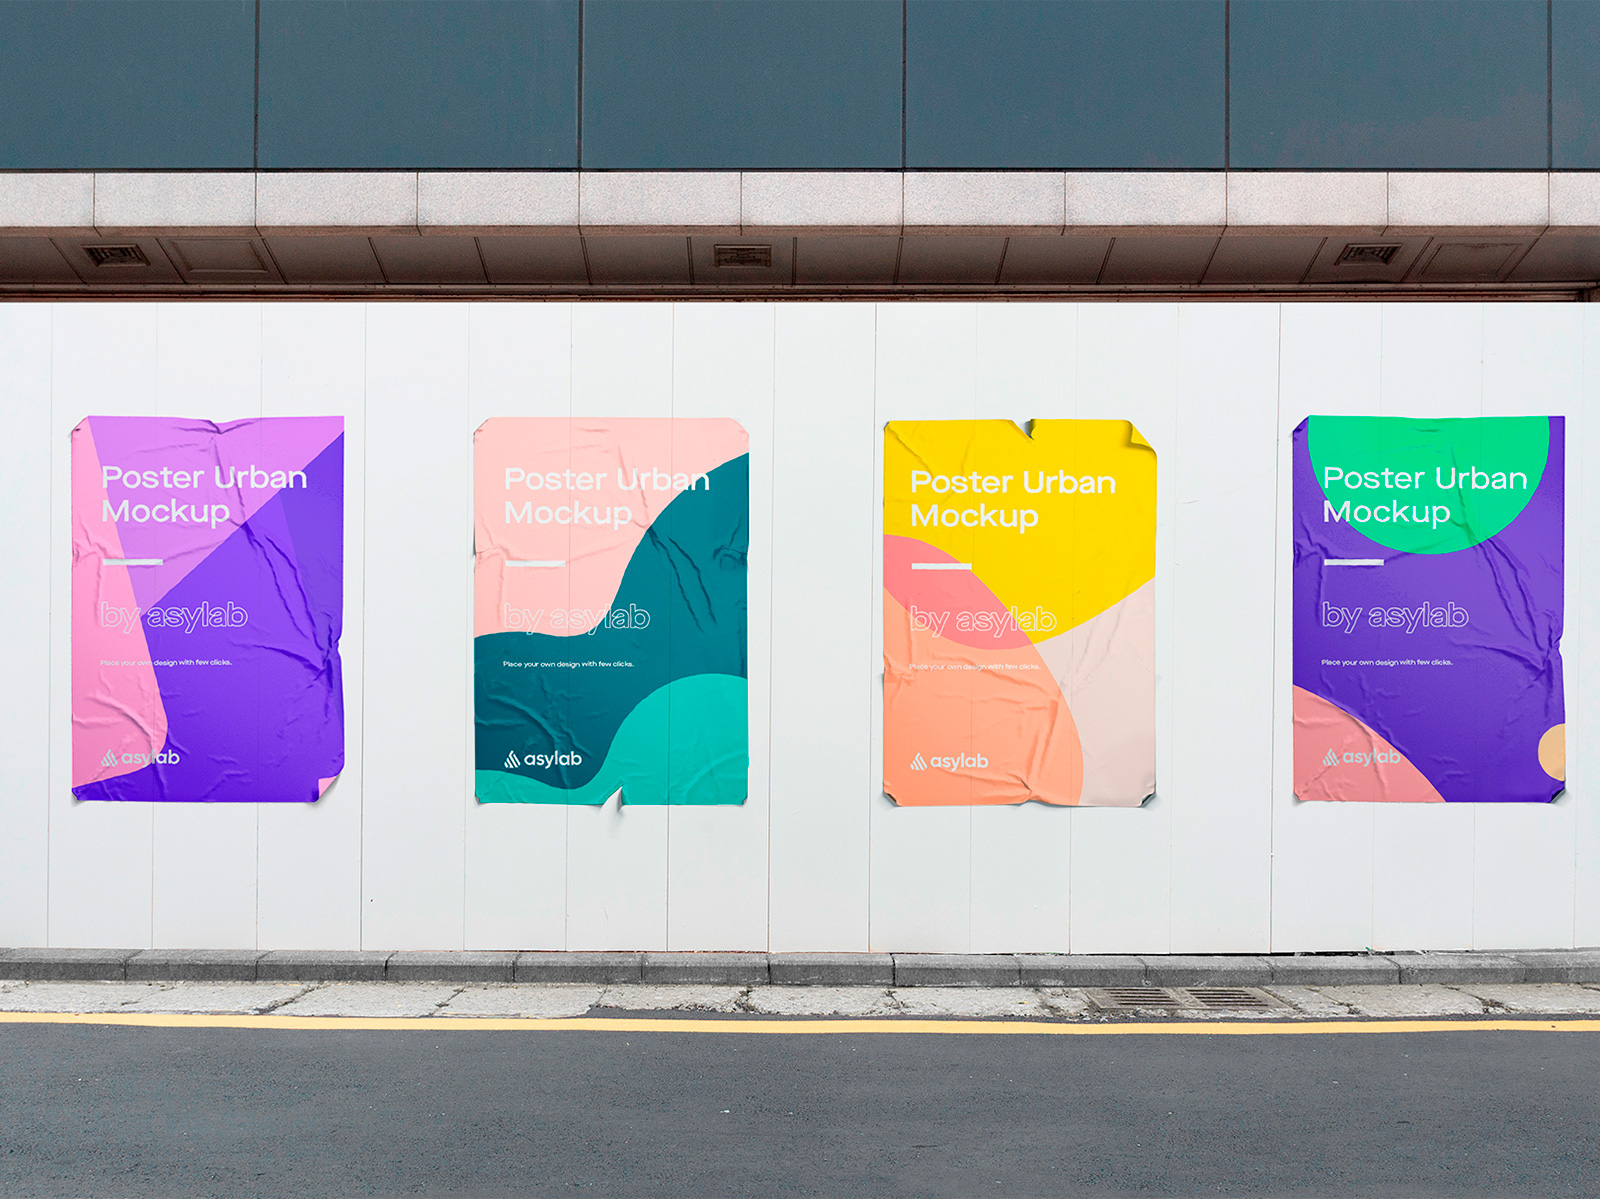 Download 10 Urban Poster Street Mockups - PSD by Asylab on Dribbble